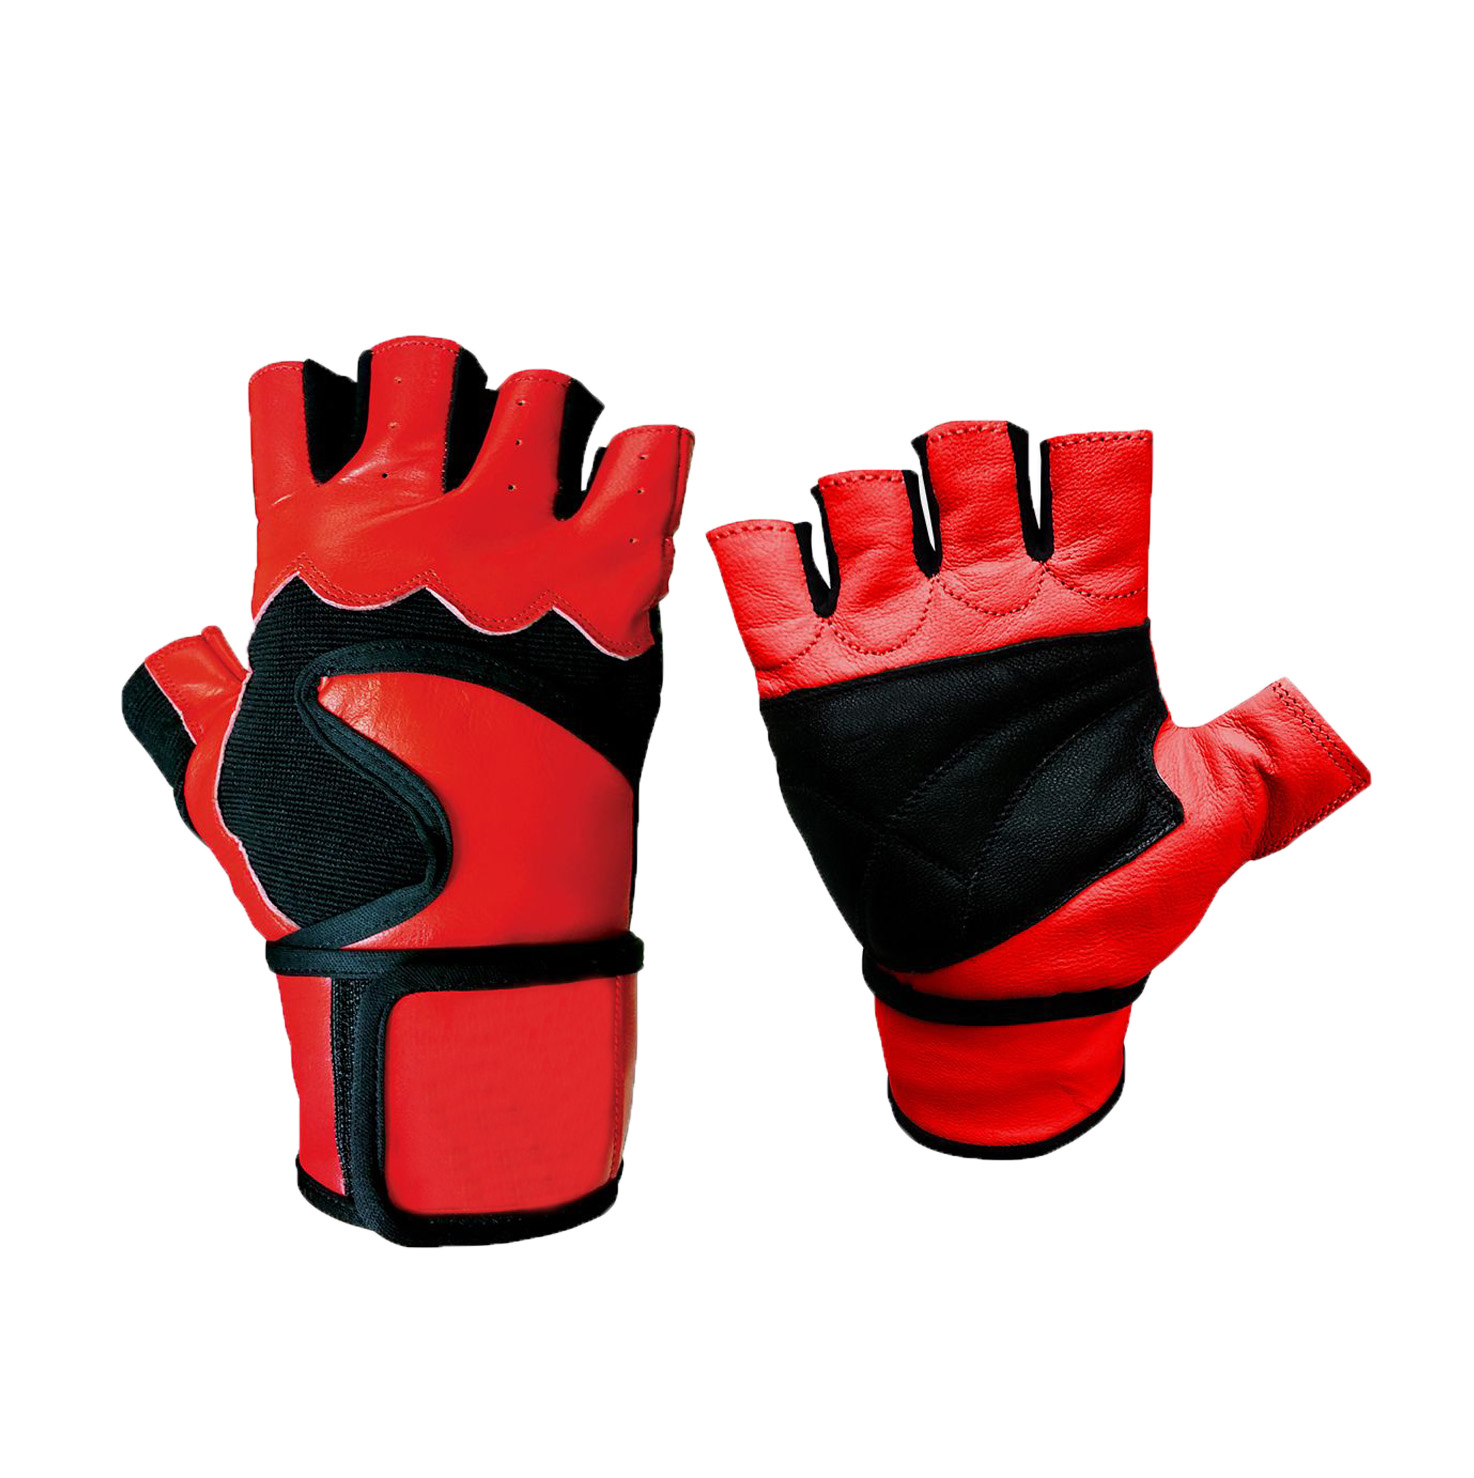 High quality Protection Unisex Workout Gloves weight lifting gloves Leather wrist wrap